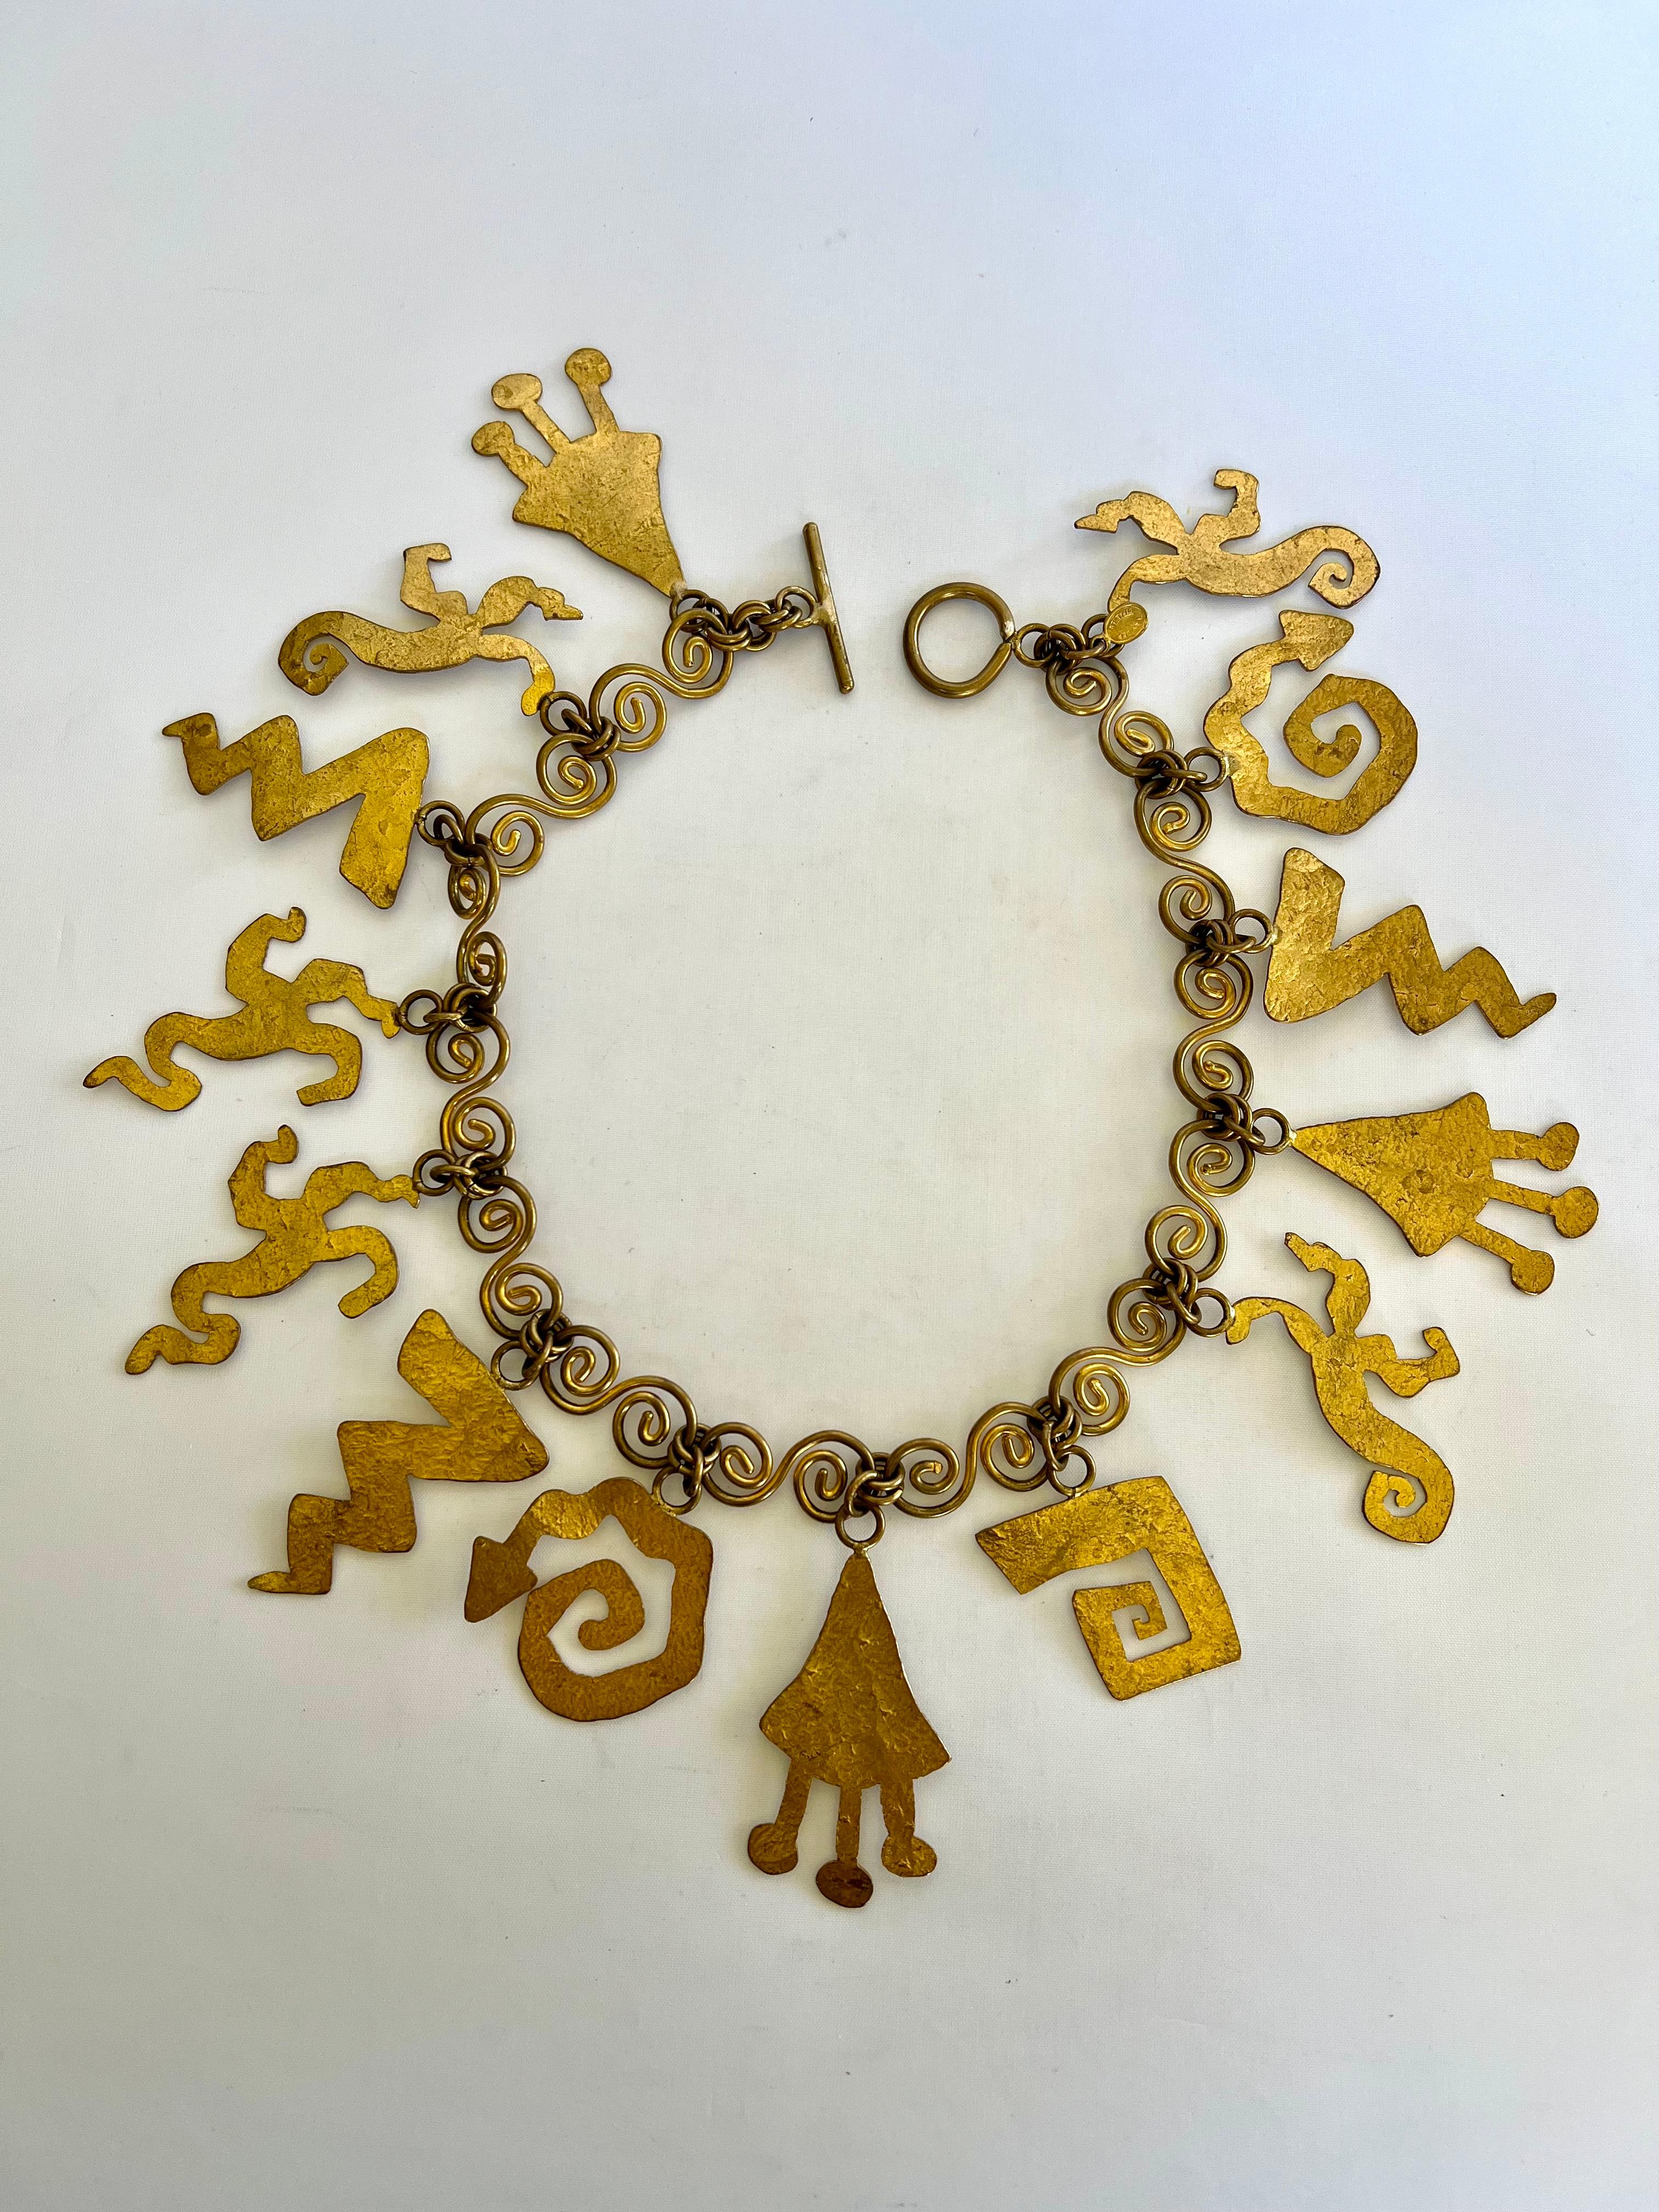 Scarce and collectible vintage artisan necklace comprised of gilt hammered metal 